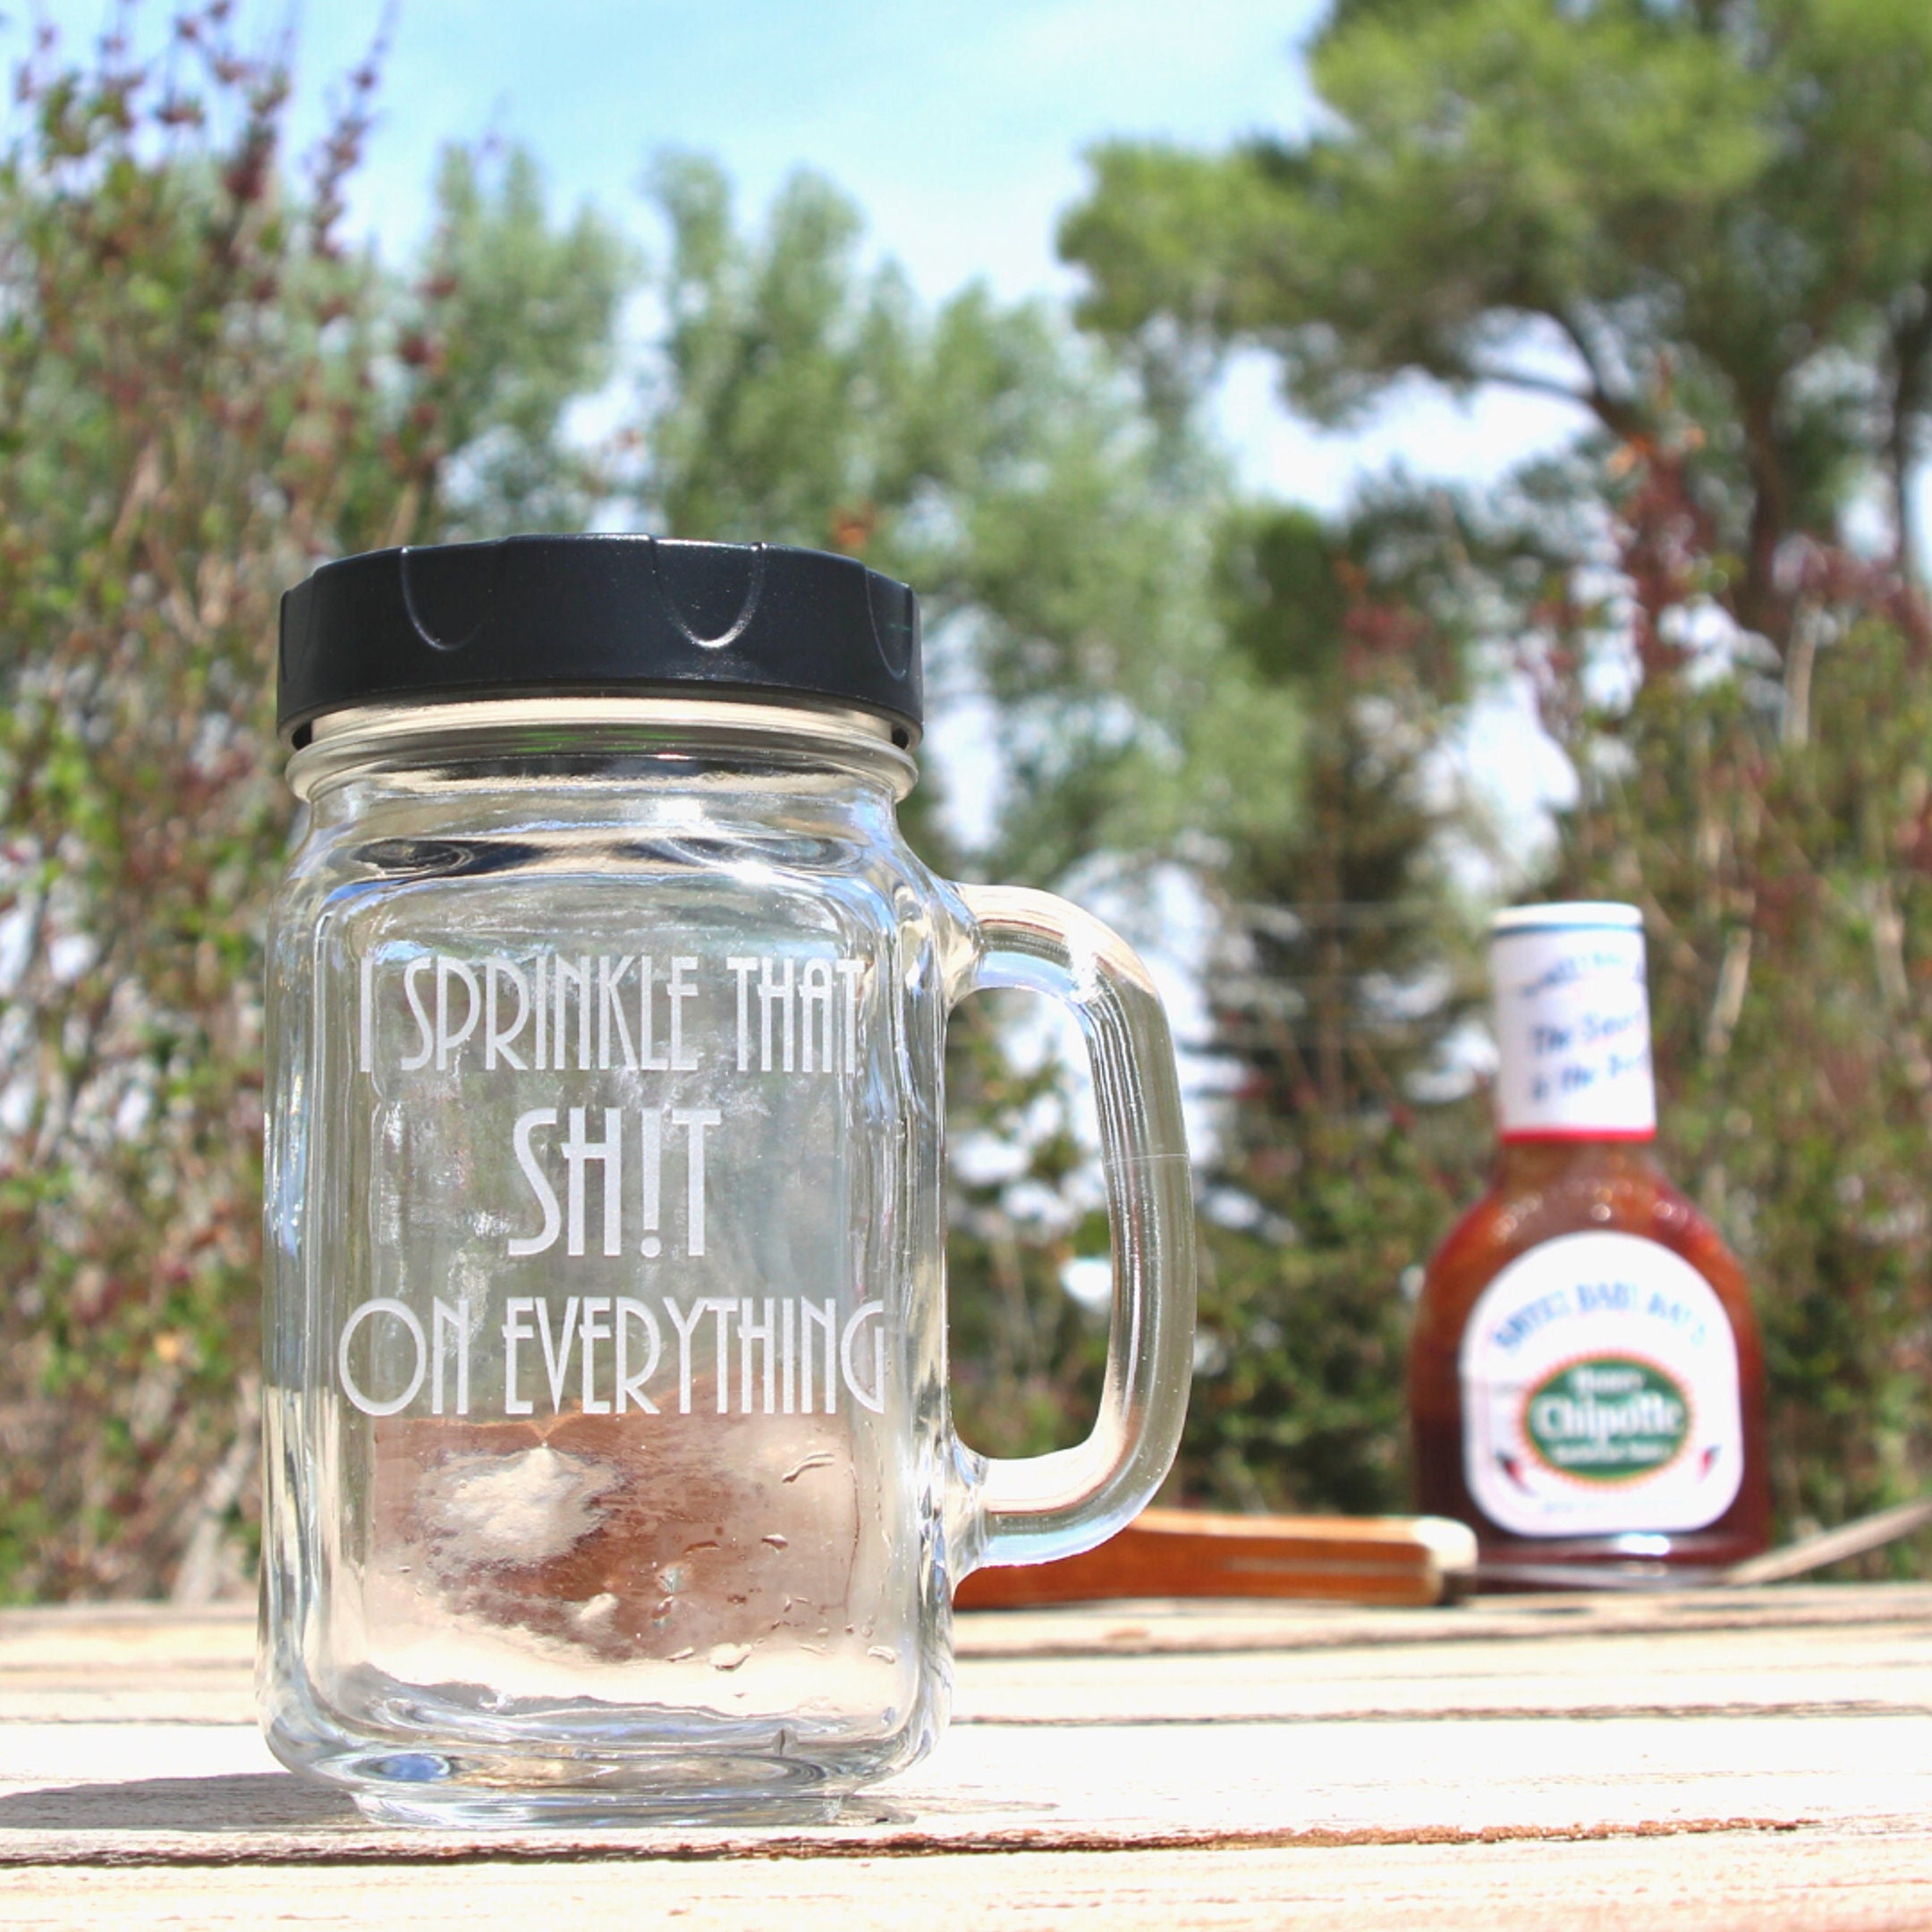 Spice Up Your Storage: 16oz Tall Glass Jars with Shaker Lids